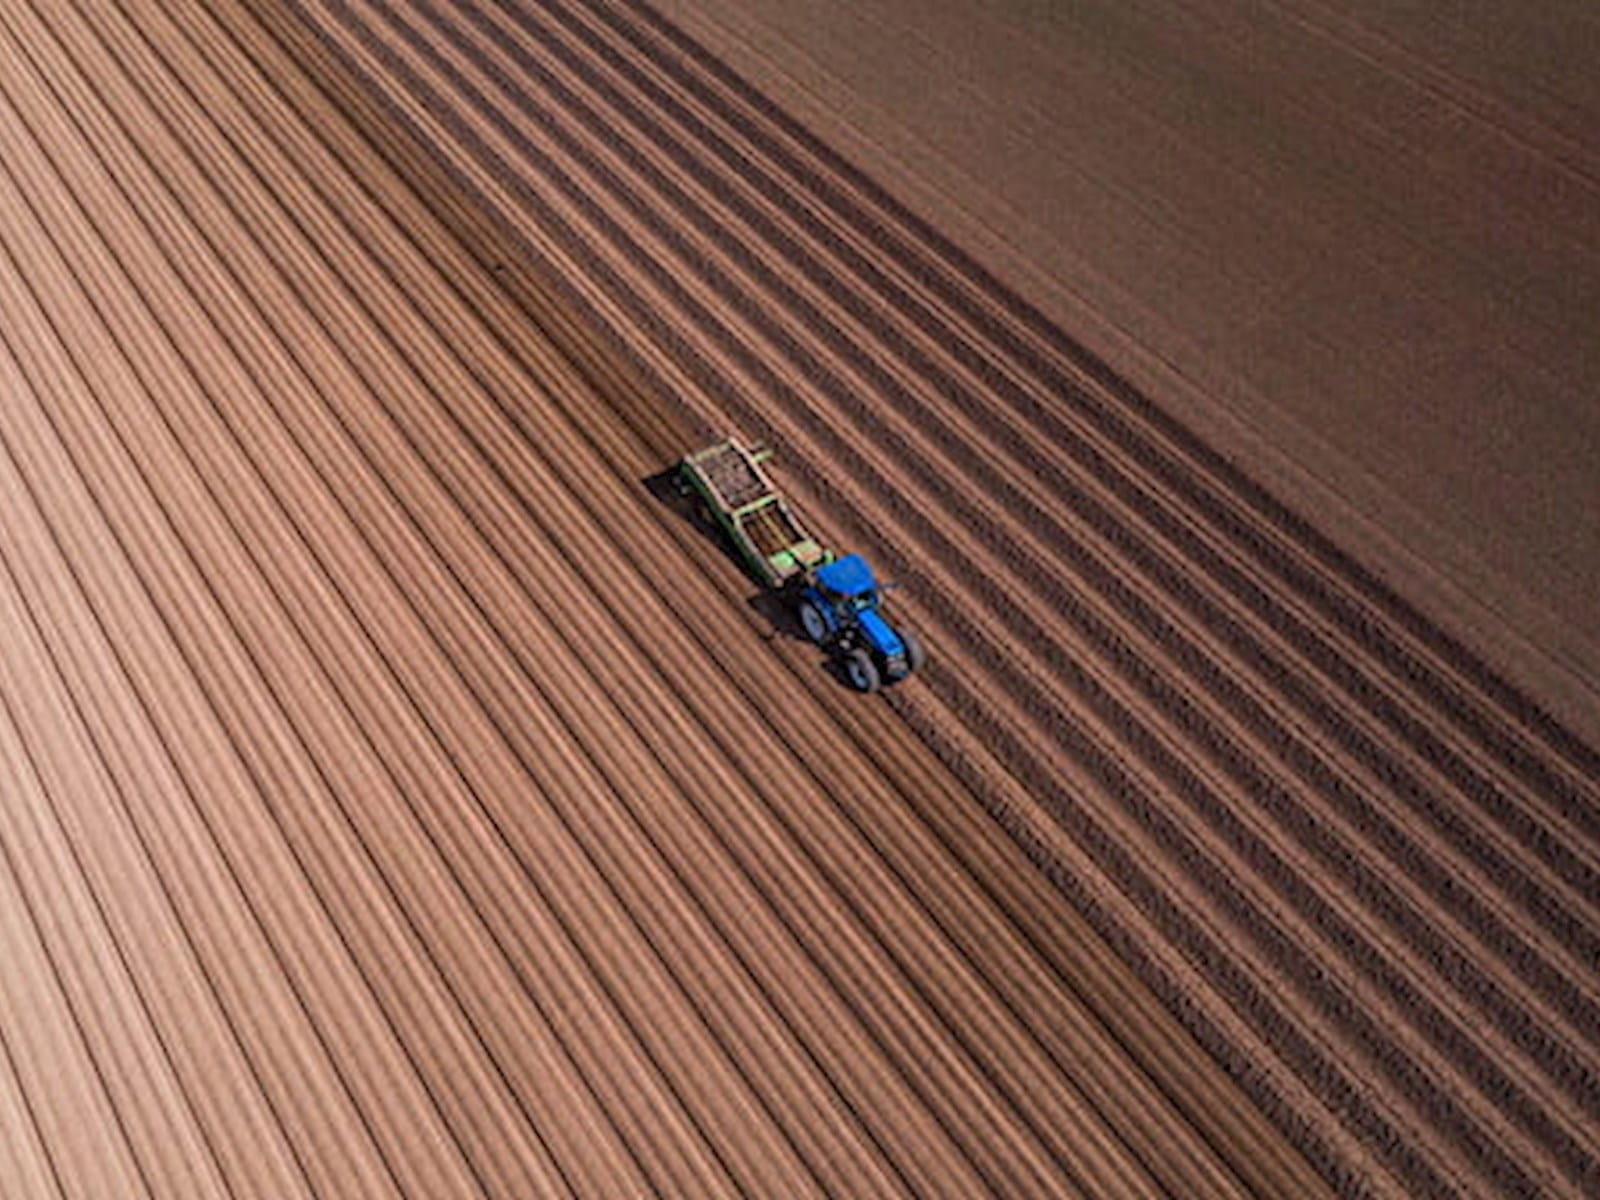 A tractor in a brown field